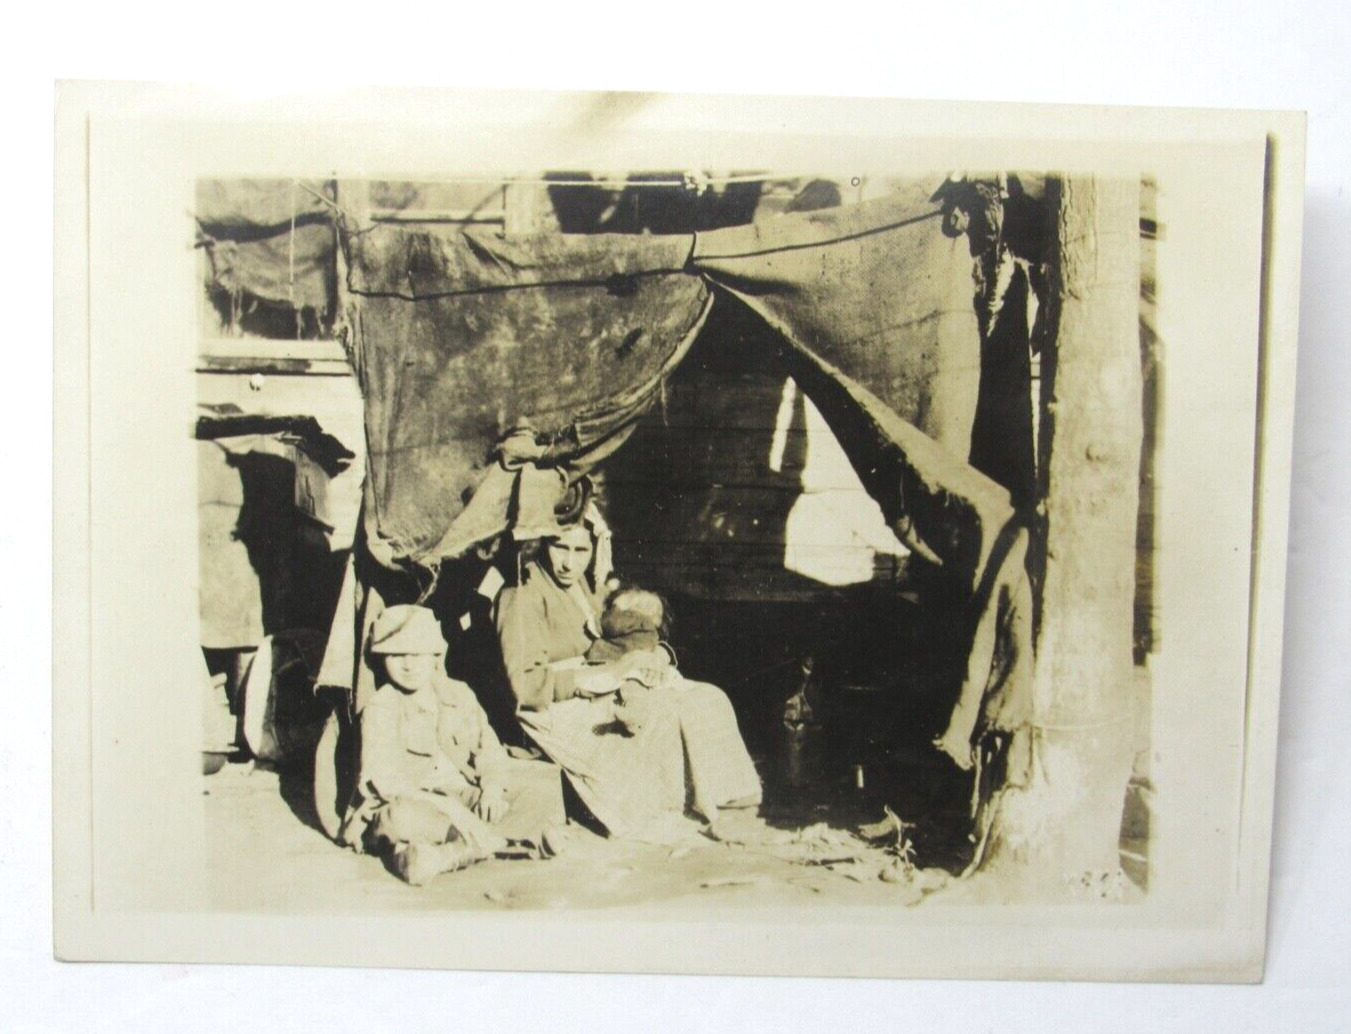 Armenian Genocide Photograph of Armenian Refugees by American Red Cross c1920